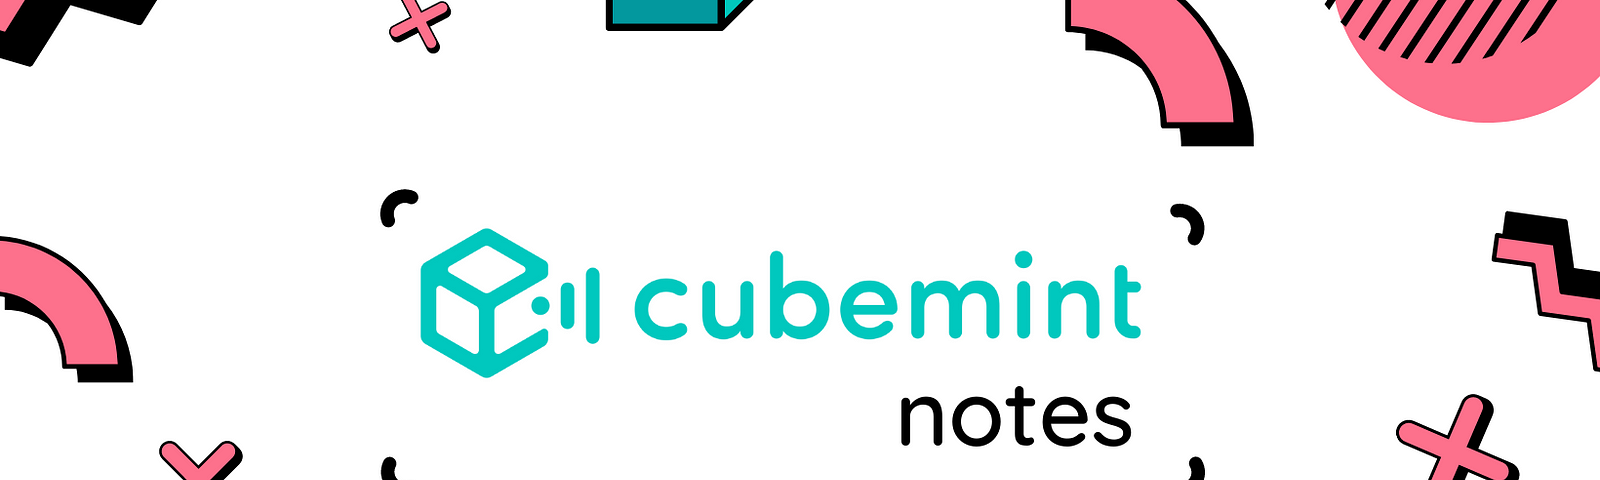 Illustration with graphic elements such as cubes, circles, bars and arches in blue and pink. In the middle of the illustration you see Cubemint’s logo: a blue cube with radio waves coming out of it on the right. Next to it reads ‘Cubemint Notes’